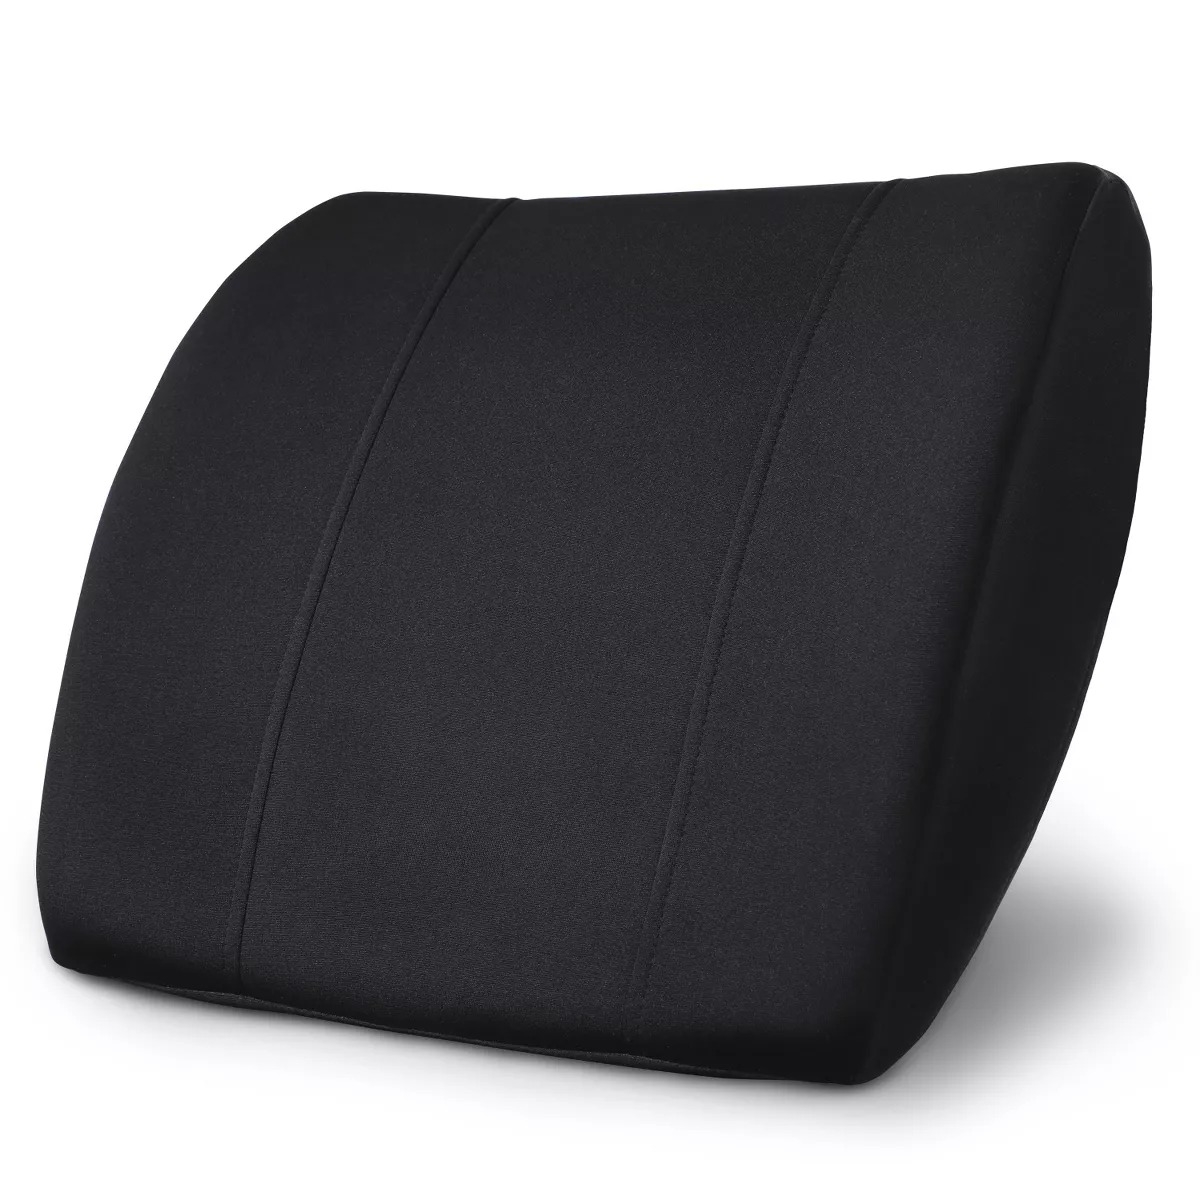 a black lumbar support pillow on a white background